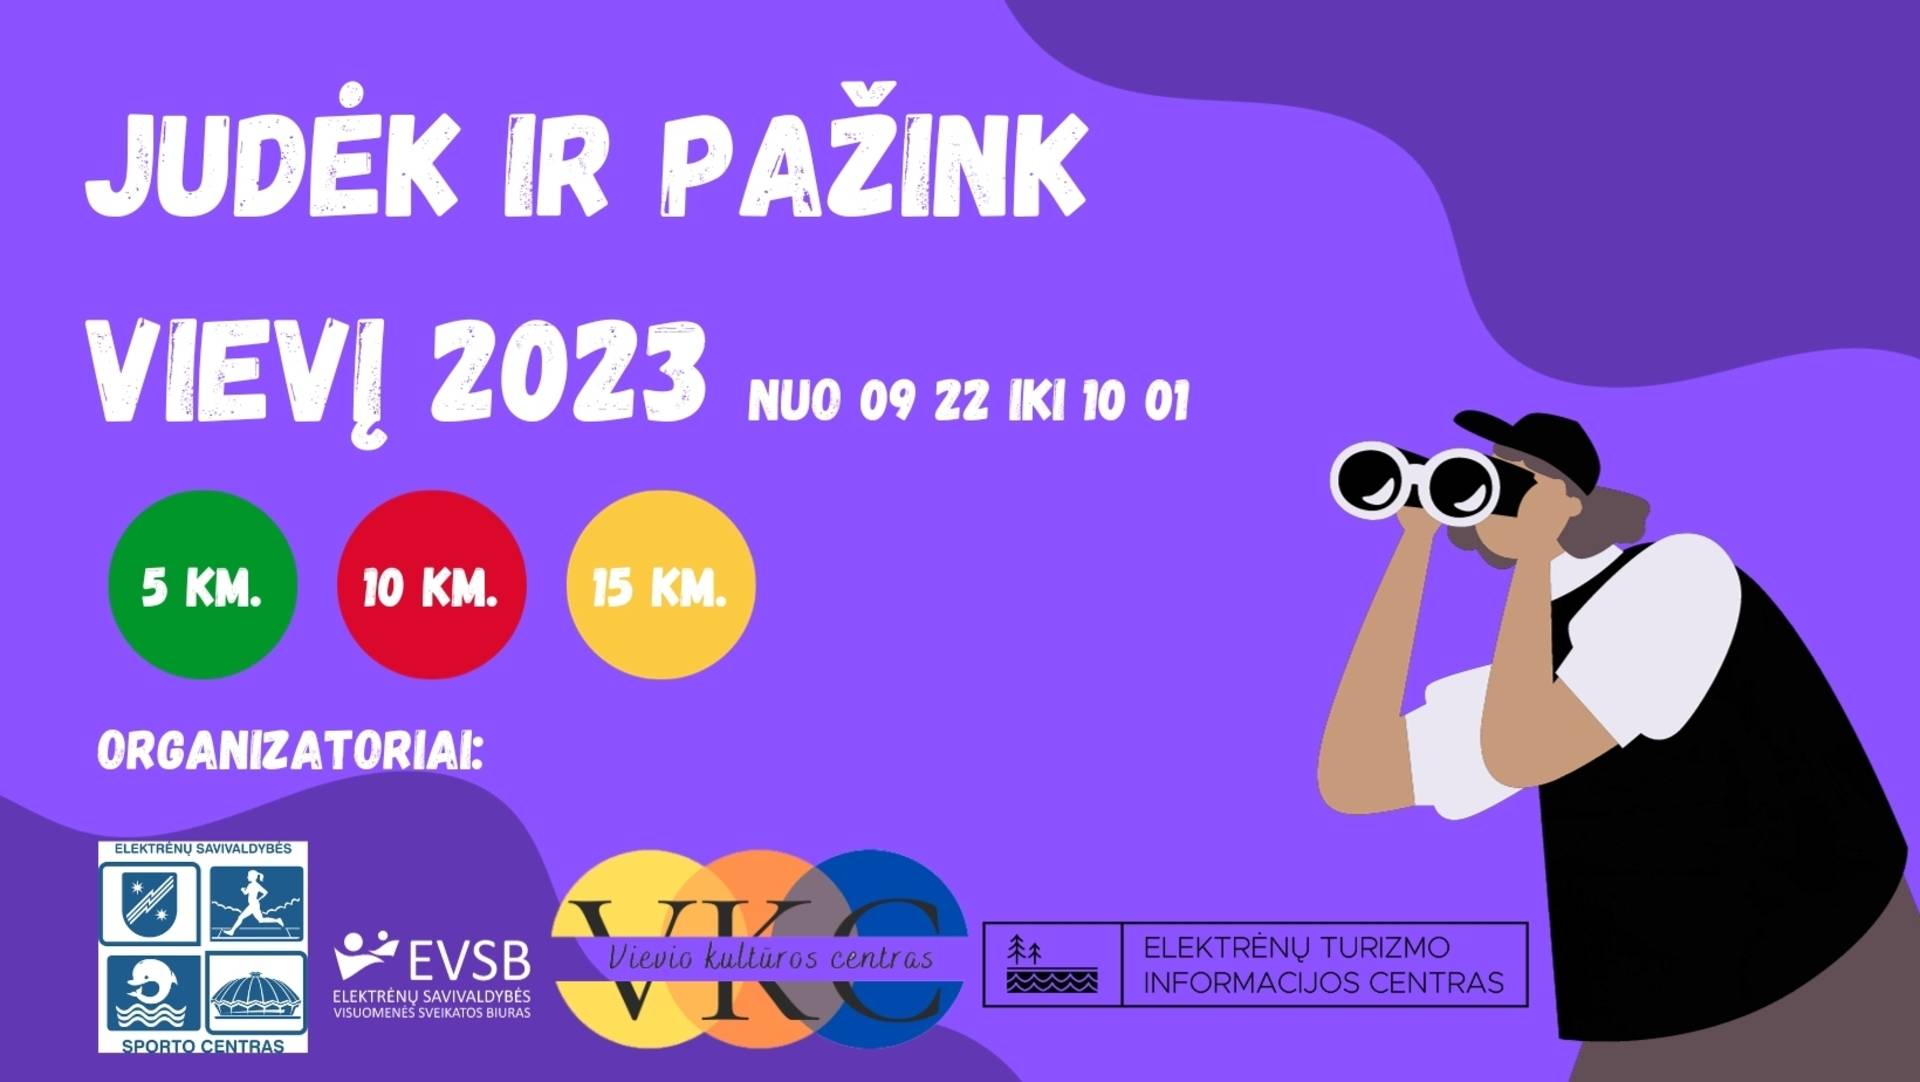 "Move and get to know Vievis 2023"